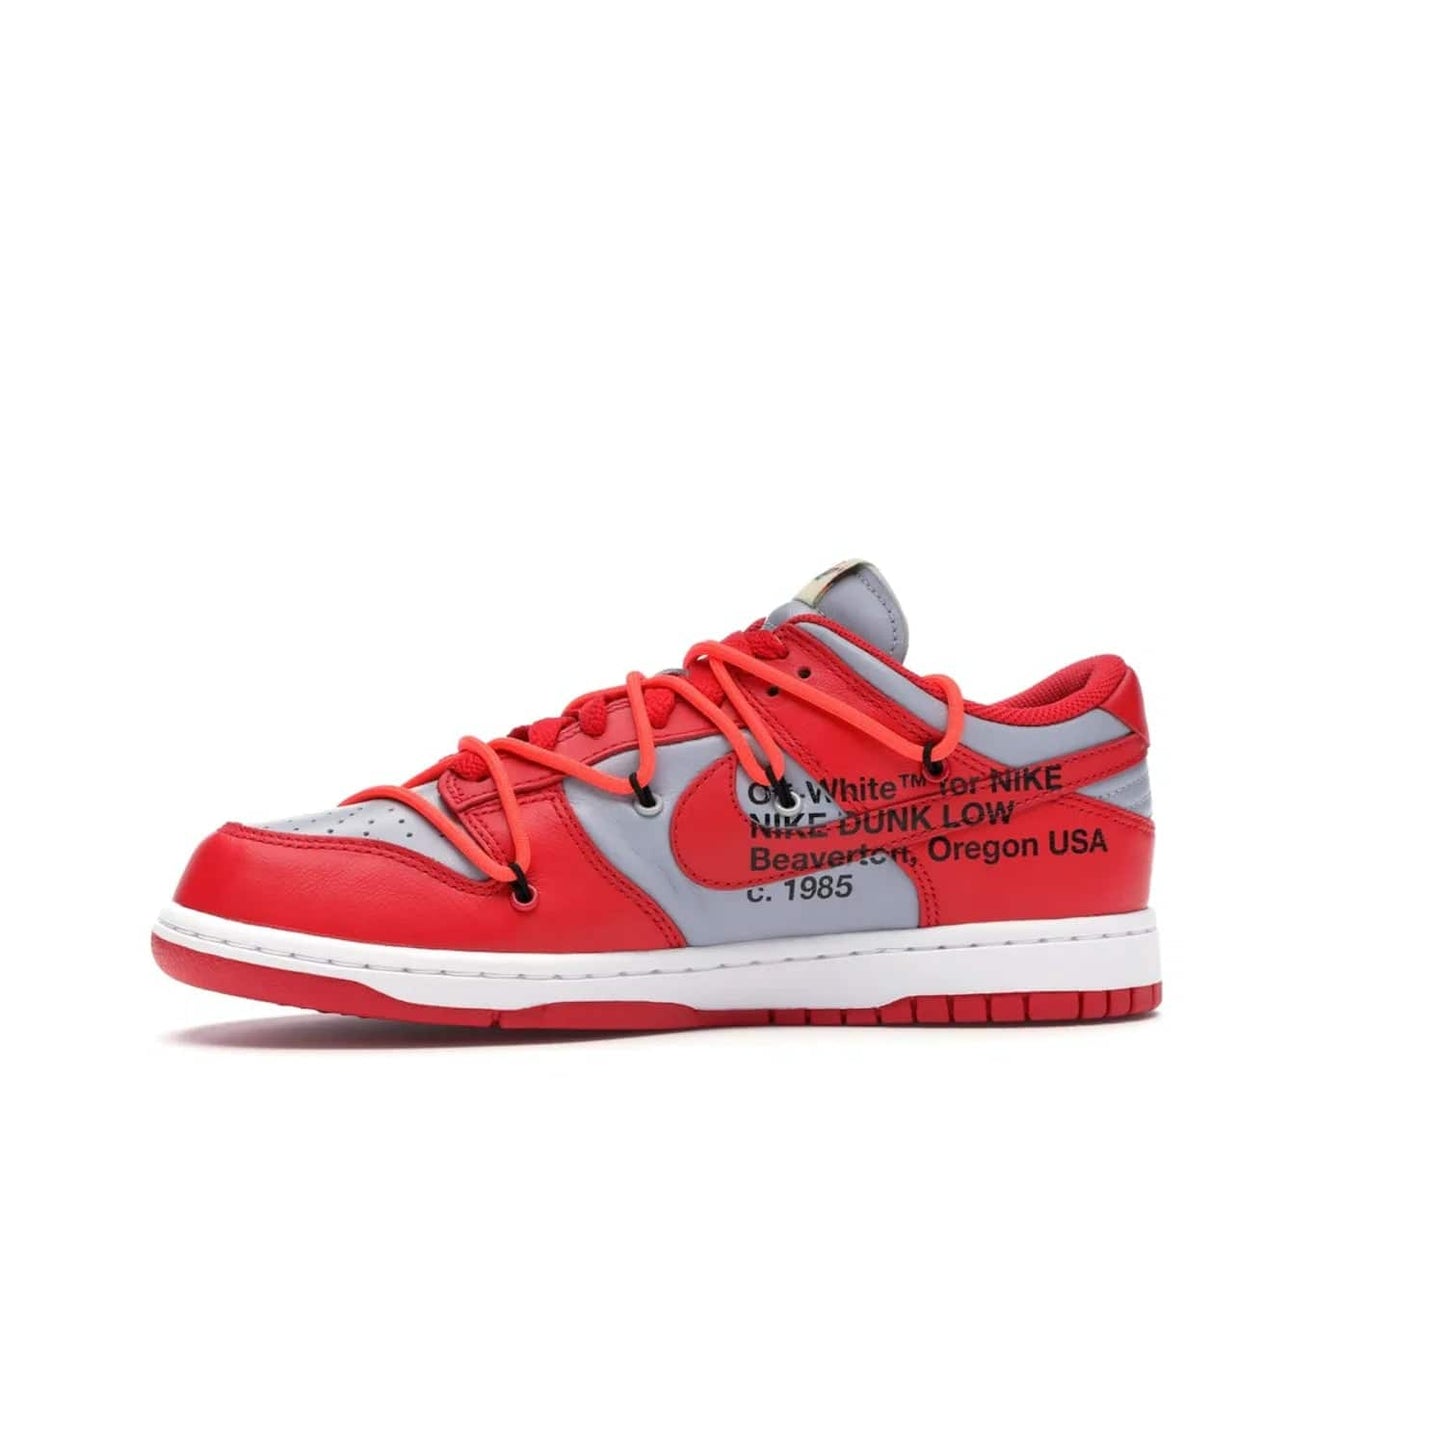 Nike Dunk Low Off-White University Red - Image 18 - Only at www.BallersClubKickz.com - The Nike Dunk Low Off-White University Red offers tribute to classic Nike Basketball silhouettes. Features include wolf grey leather, university red overlays, zip-ties, and Off-White text. Perfect for any sneaker fan, these stylish sneakers released in December of 2019.